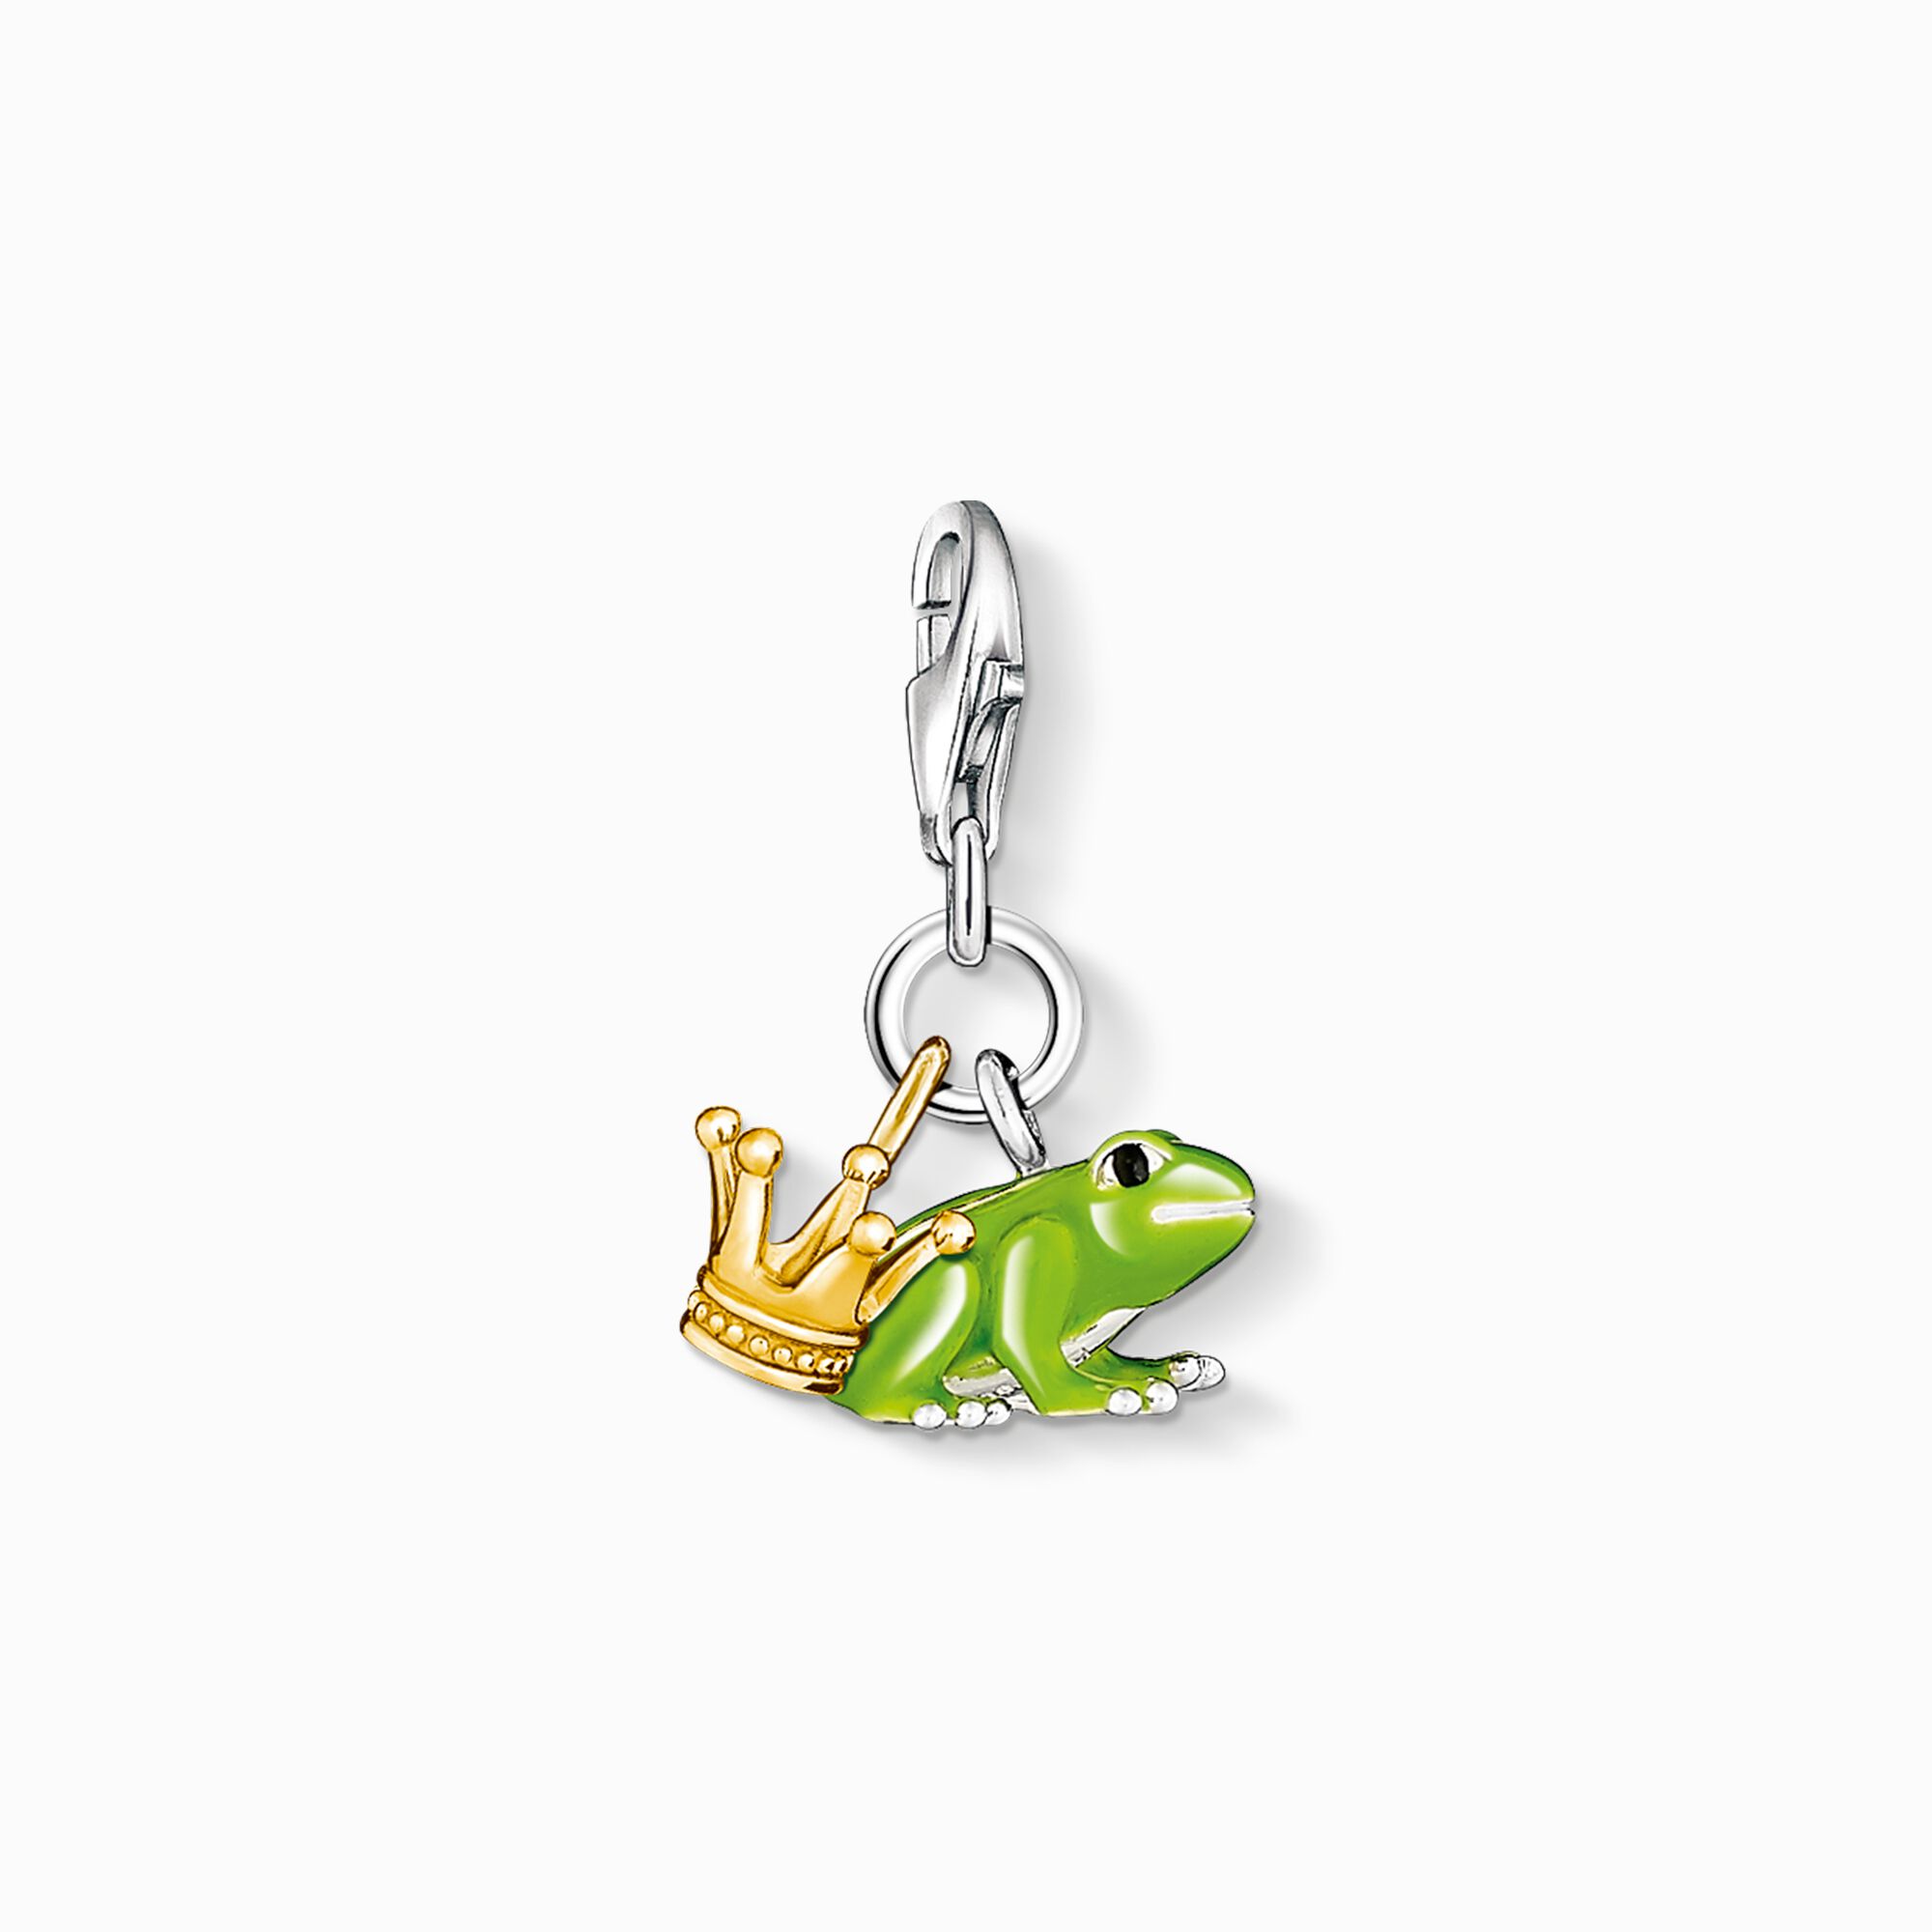 Charm pendant Frog Prince from the Charm Club collection in the THOMAS SABO online store